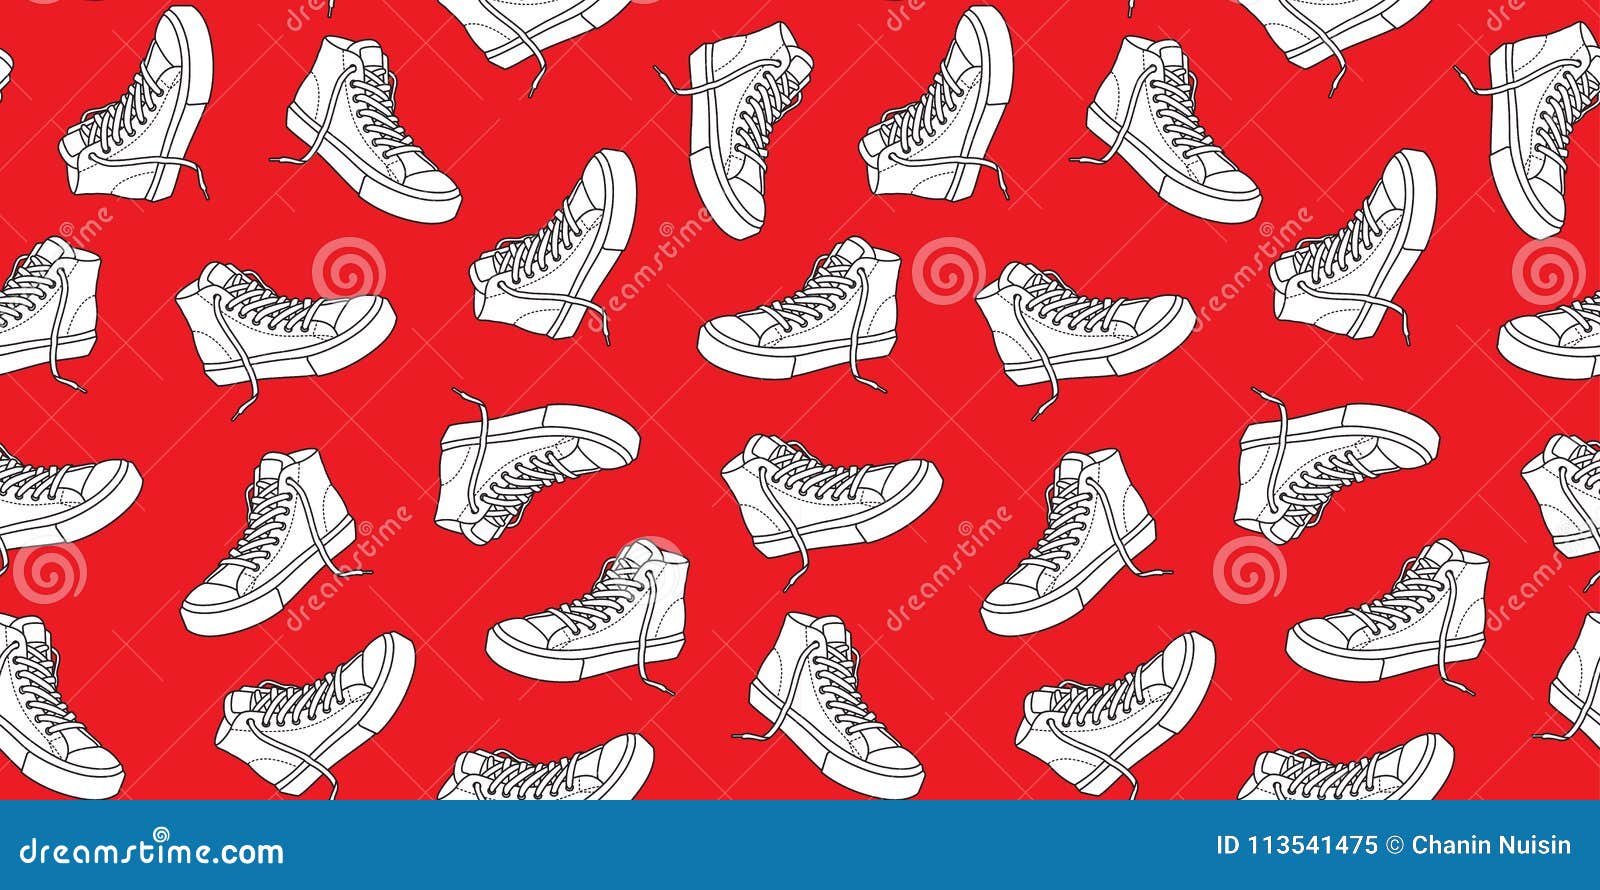 Download wallpaper 1920x1080 sneakers, shoes, style, legs full hd, hdtv,  fhd, 1080p hd background